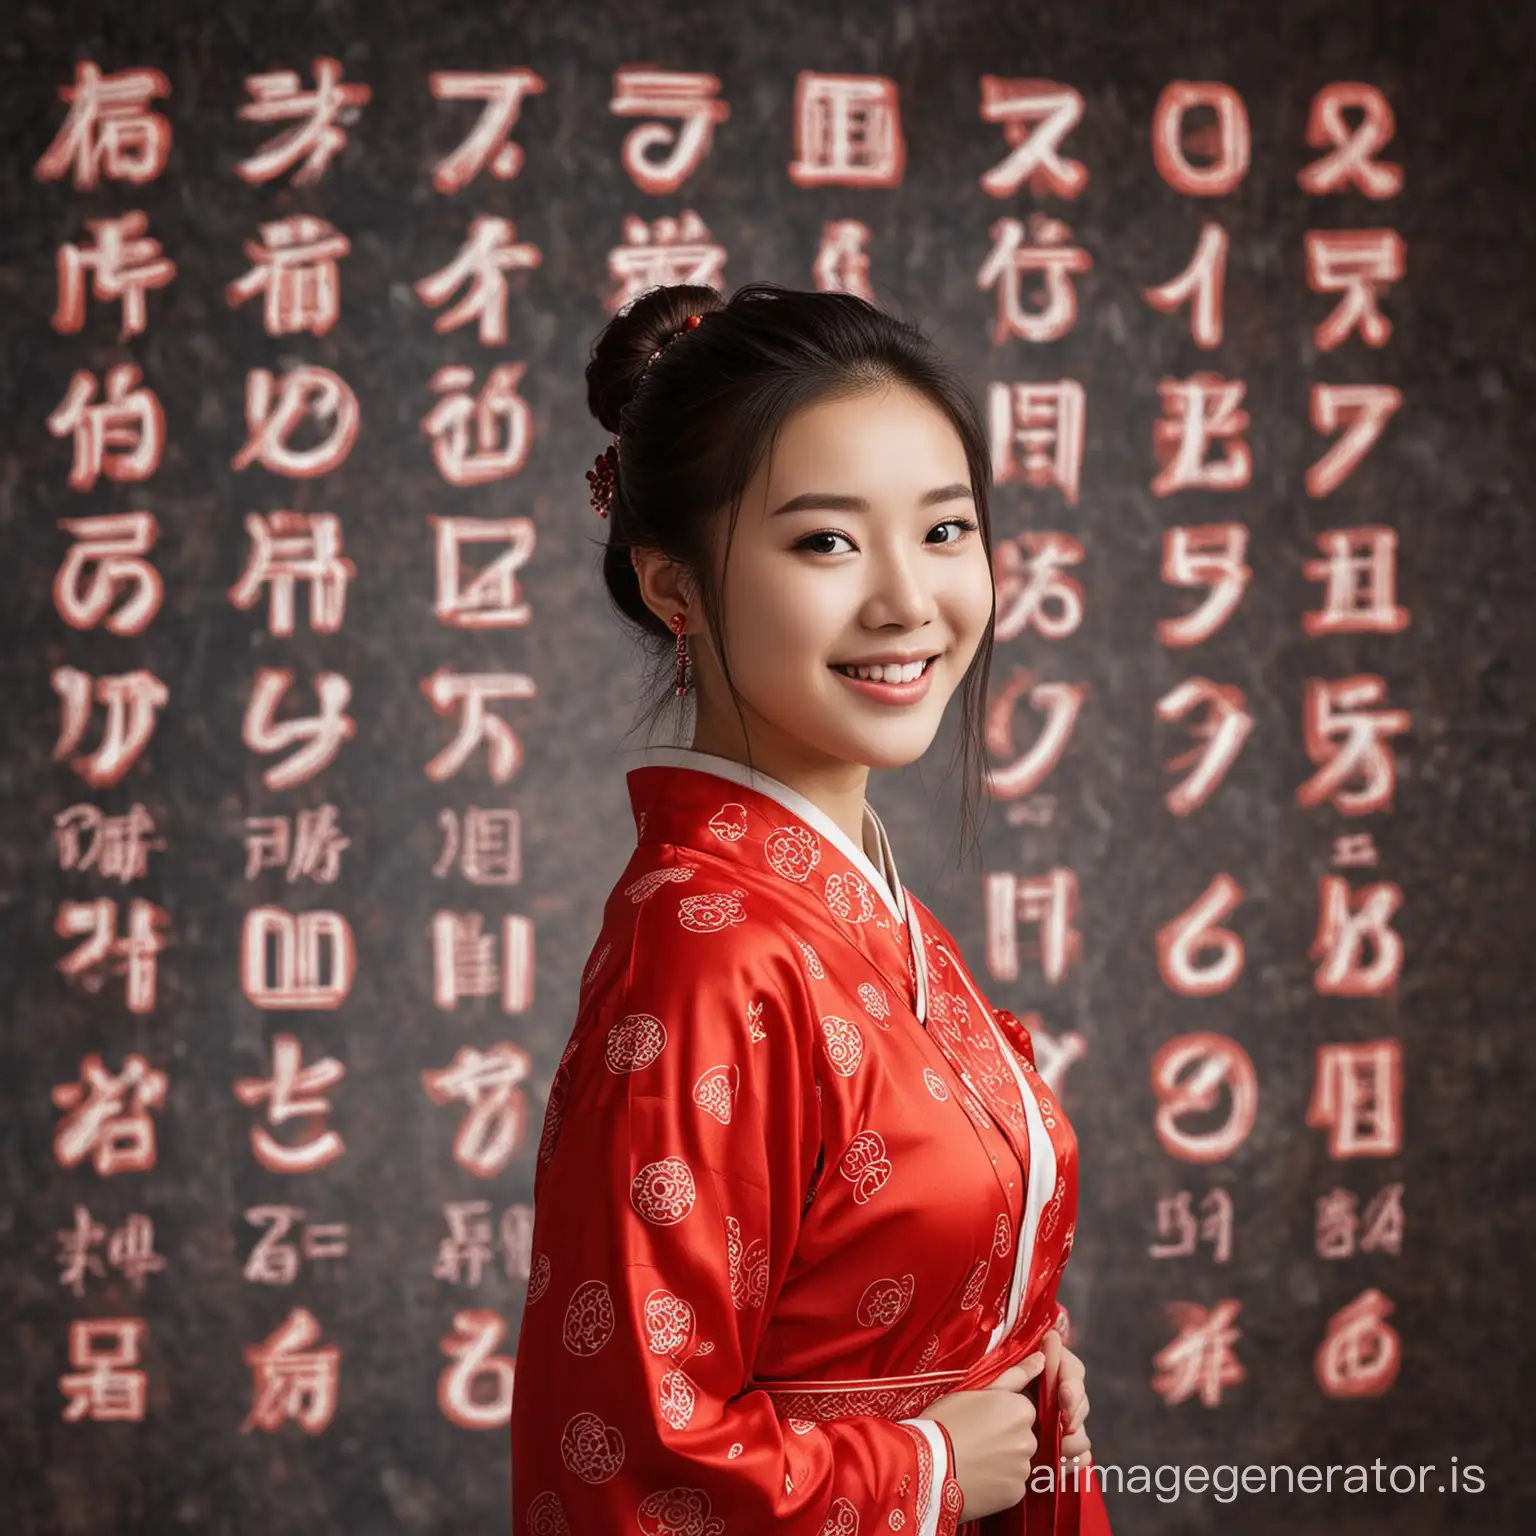 Cheerful-Chinese-Girl-Surrounded-by-Lucky-and-Unlucky-Numbers-in-Cultural-Setting